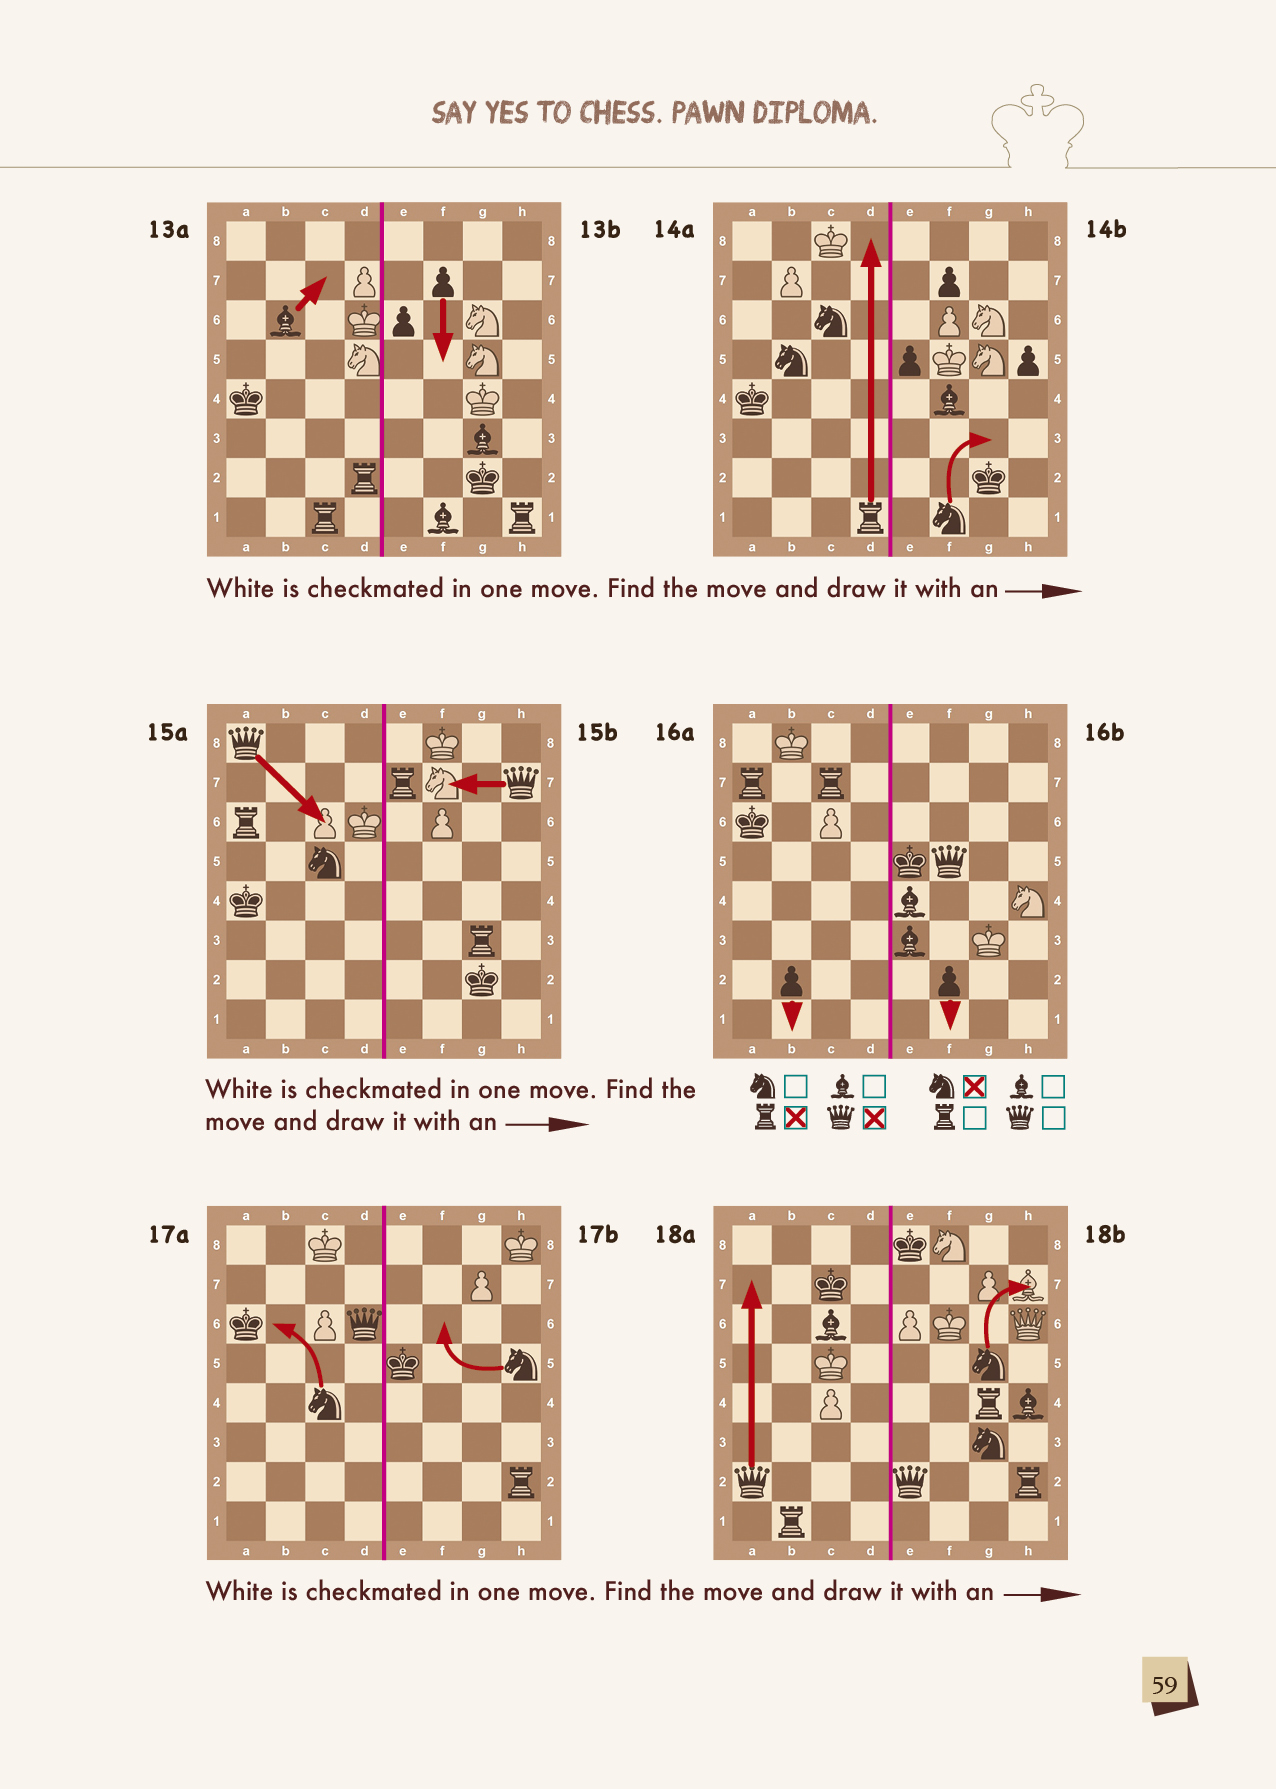 sayyes2chess_solutions_page_59.jpg